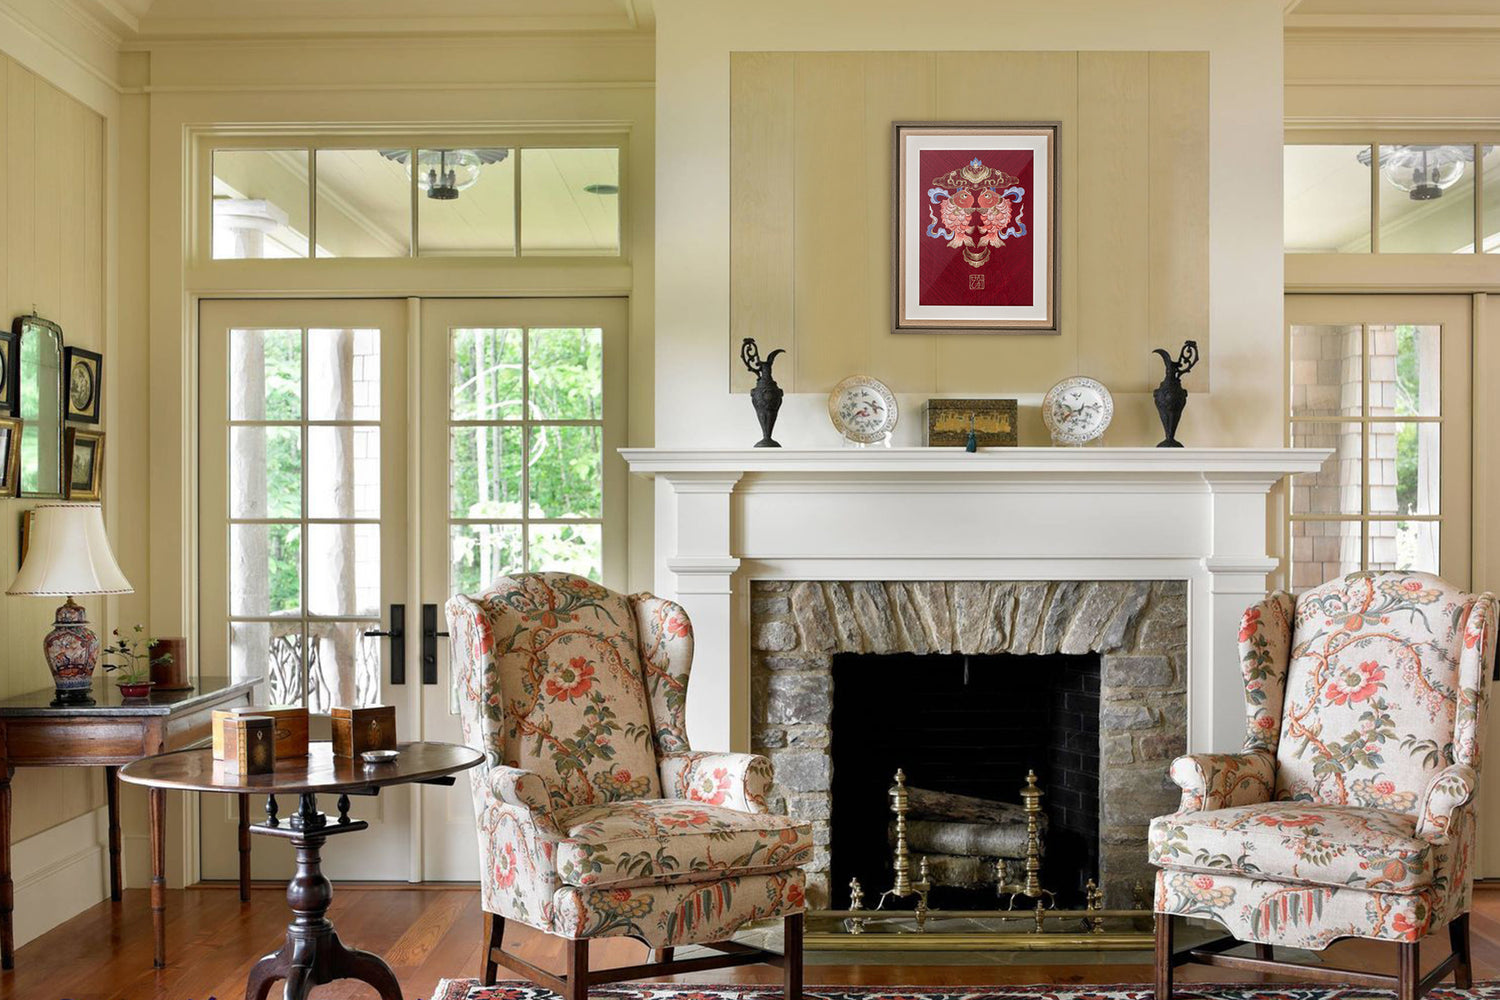 An embroidered artwork with double koi fish hangs above the vintage-inspired living room fireplace.